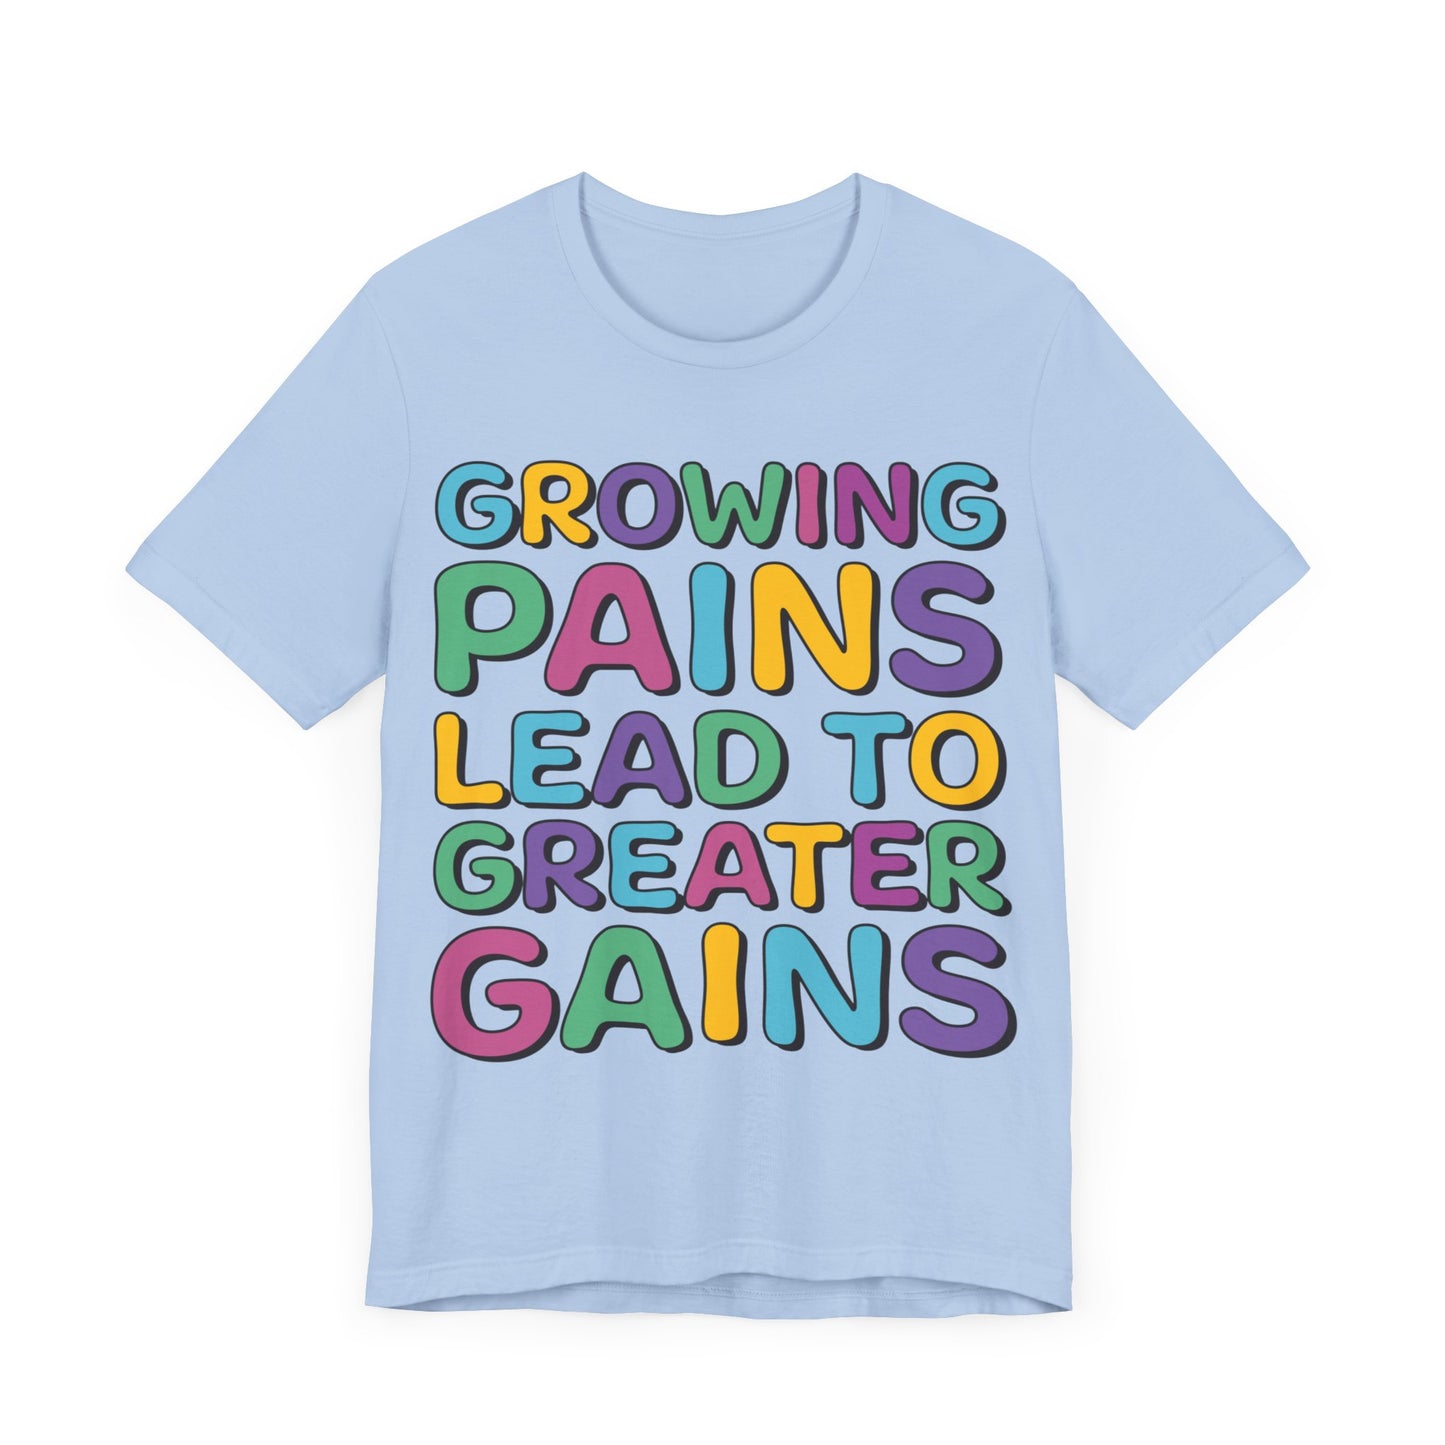 Growing Pains Lead To Greater Gains Shirt, Occupational Therapy Shirt